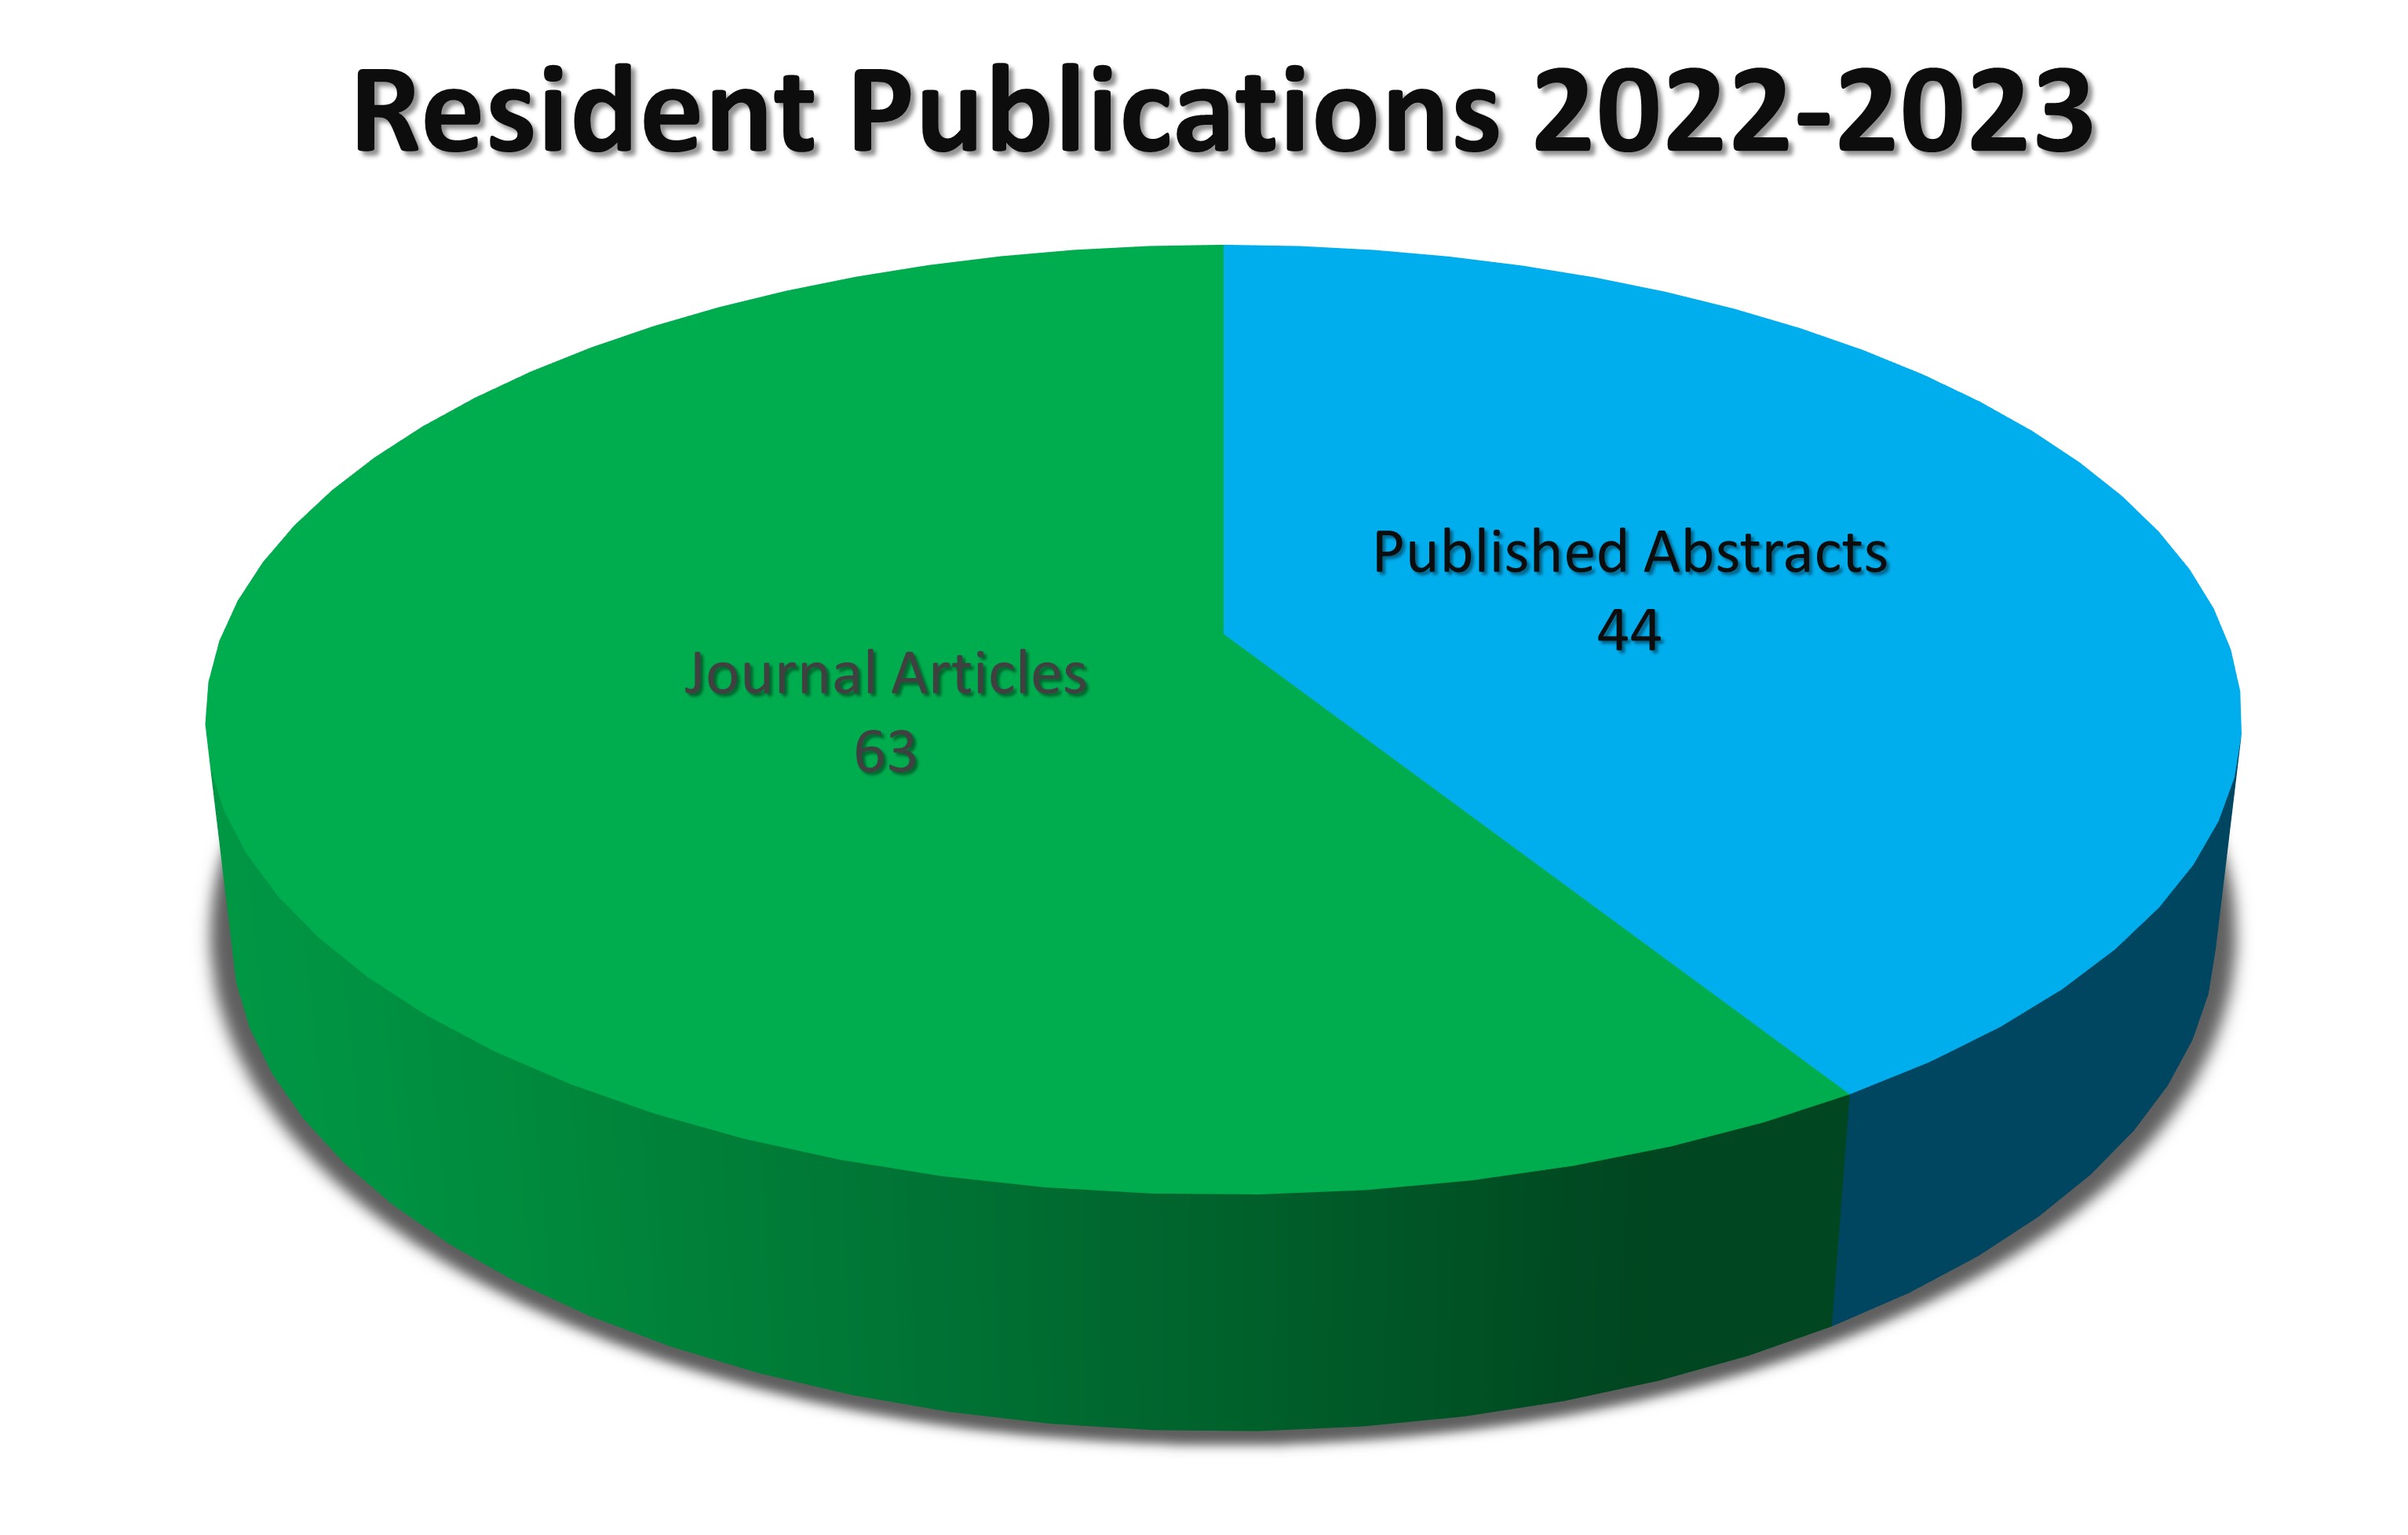 Pie chart of IM Resident publications for the 2022-2023 academic year. Lists 44 published abstracts and 63 journal articles.